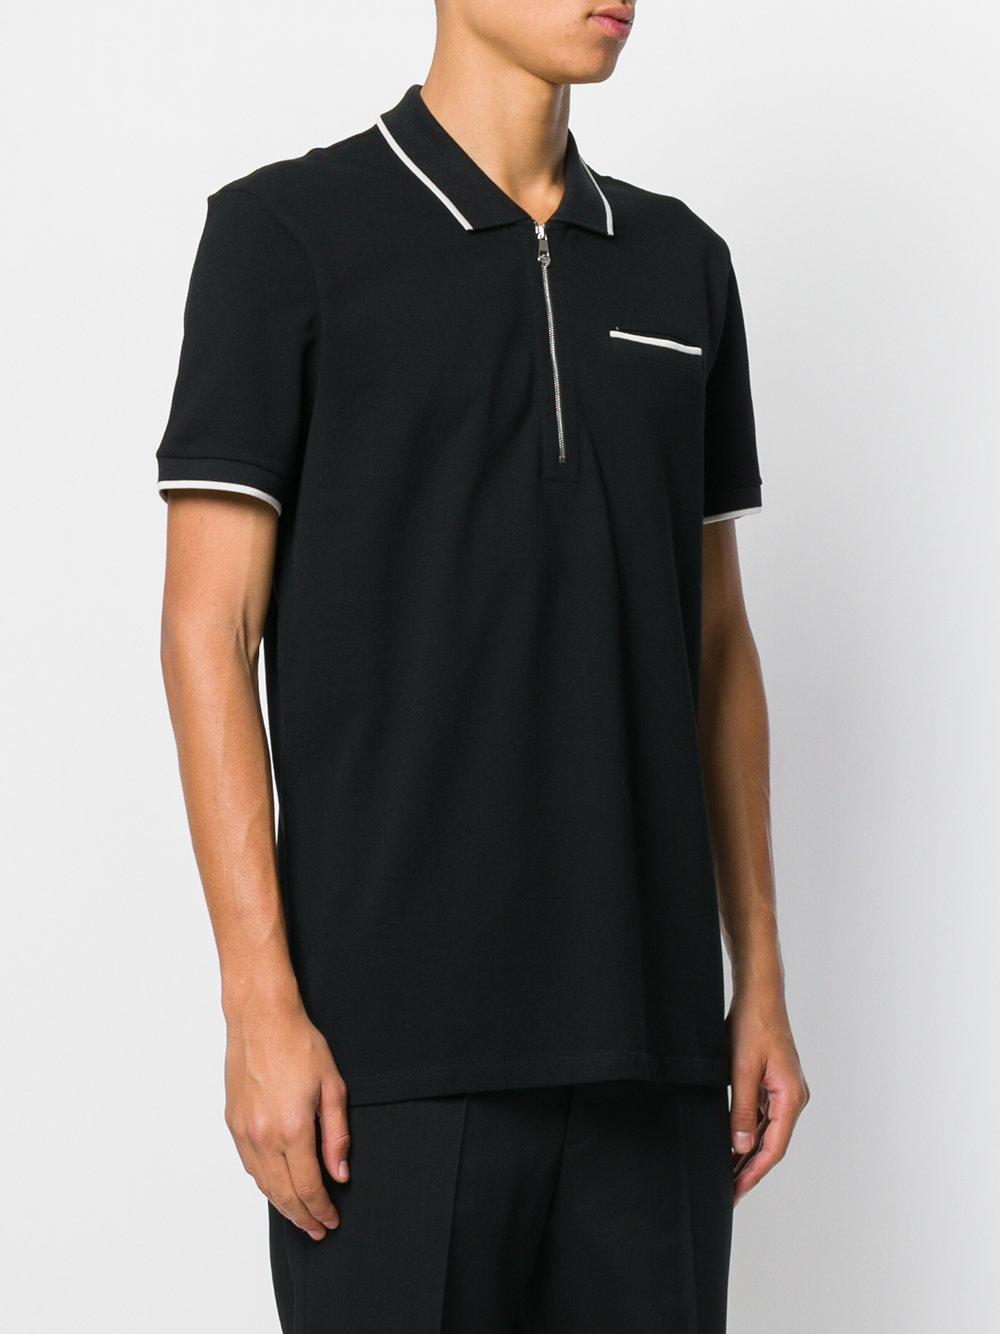 Versace Cotton Zip Front Polo Shirt in Black for Men - Lyst